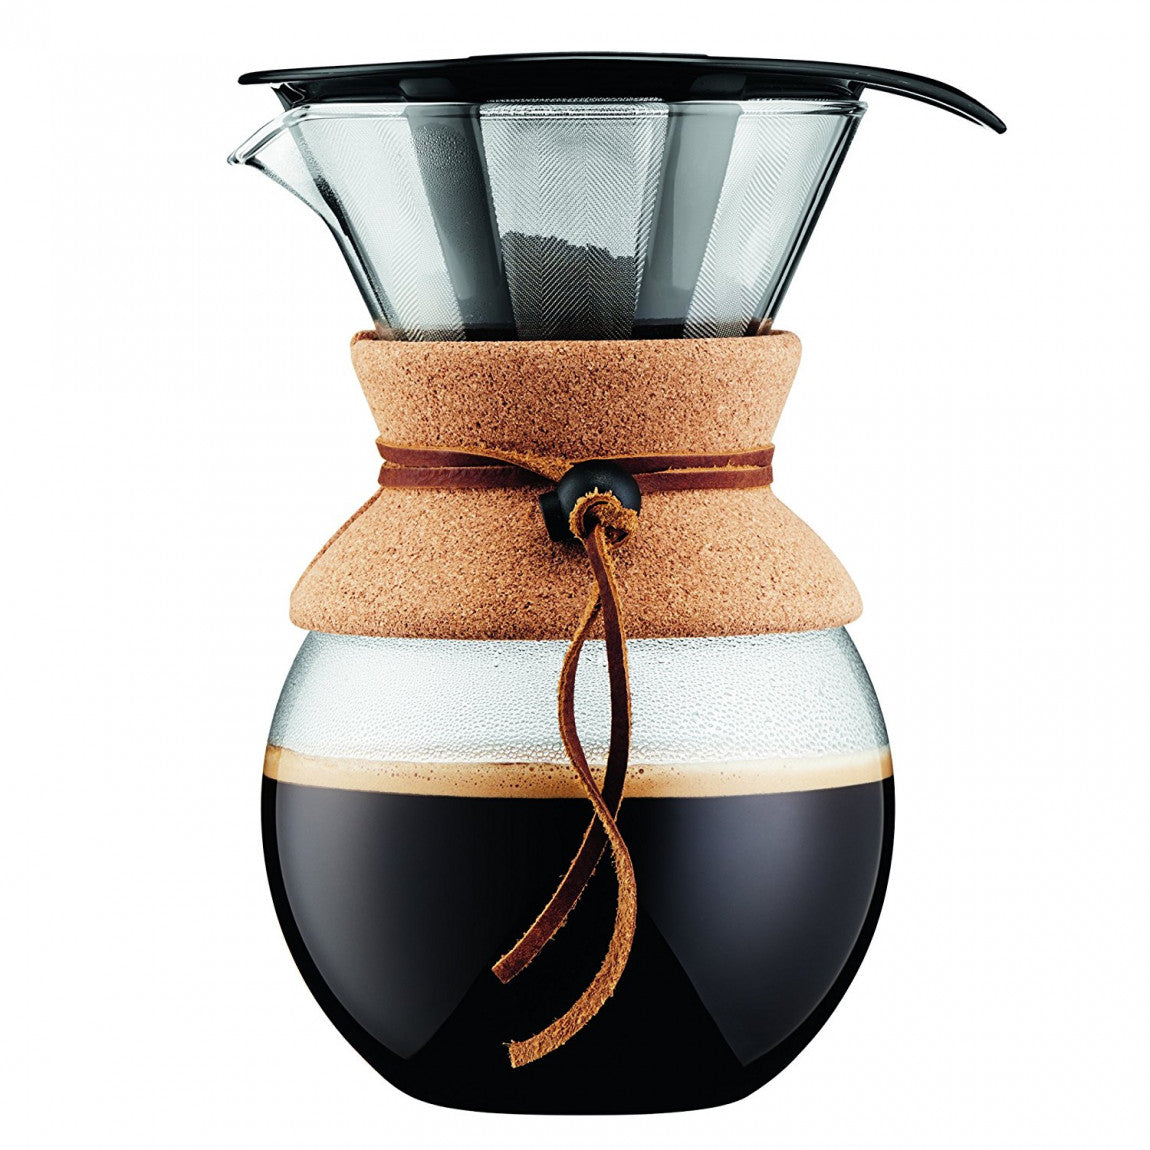 Glass Pour-Over Coffee Maker, 1 L, by Bodum